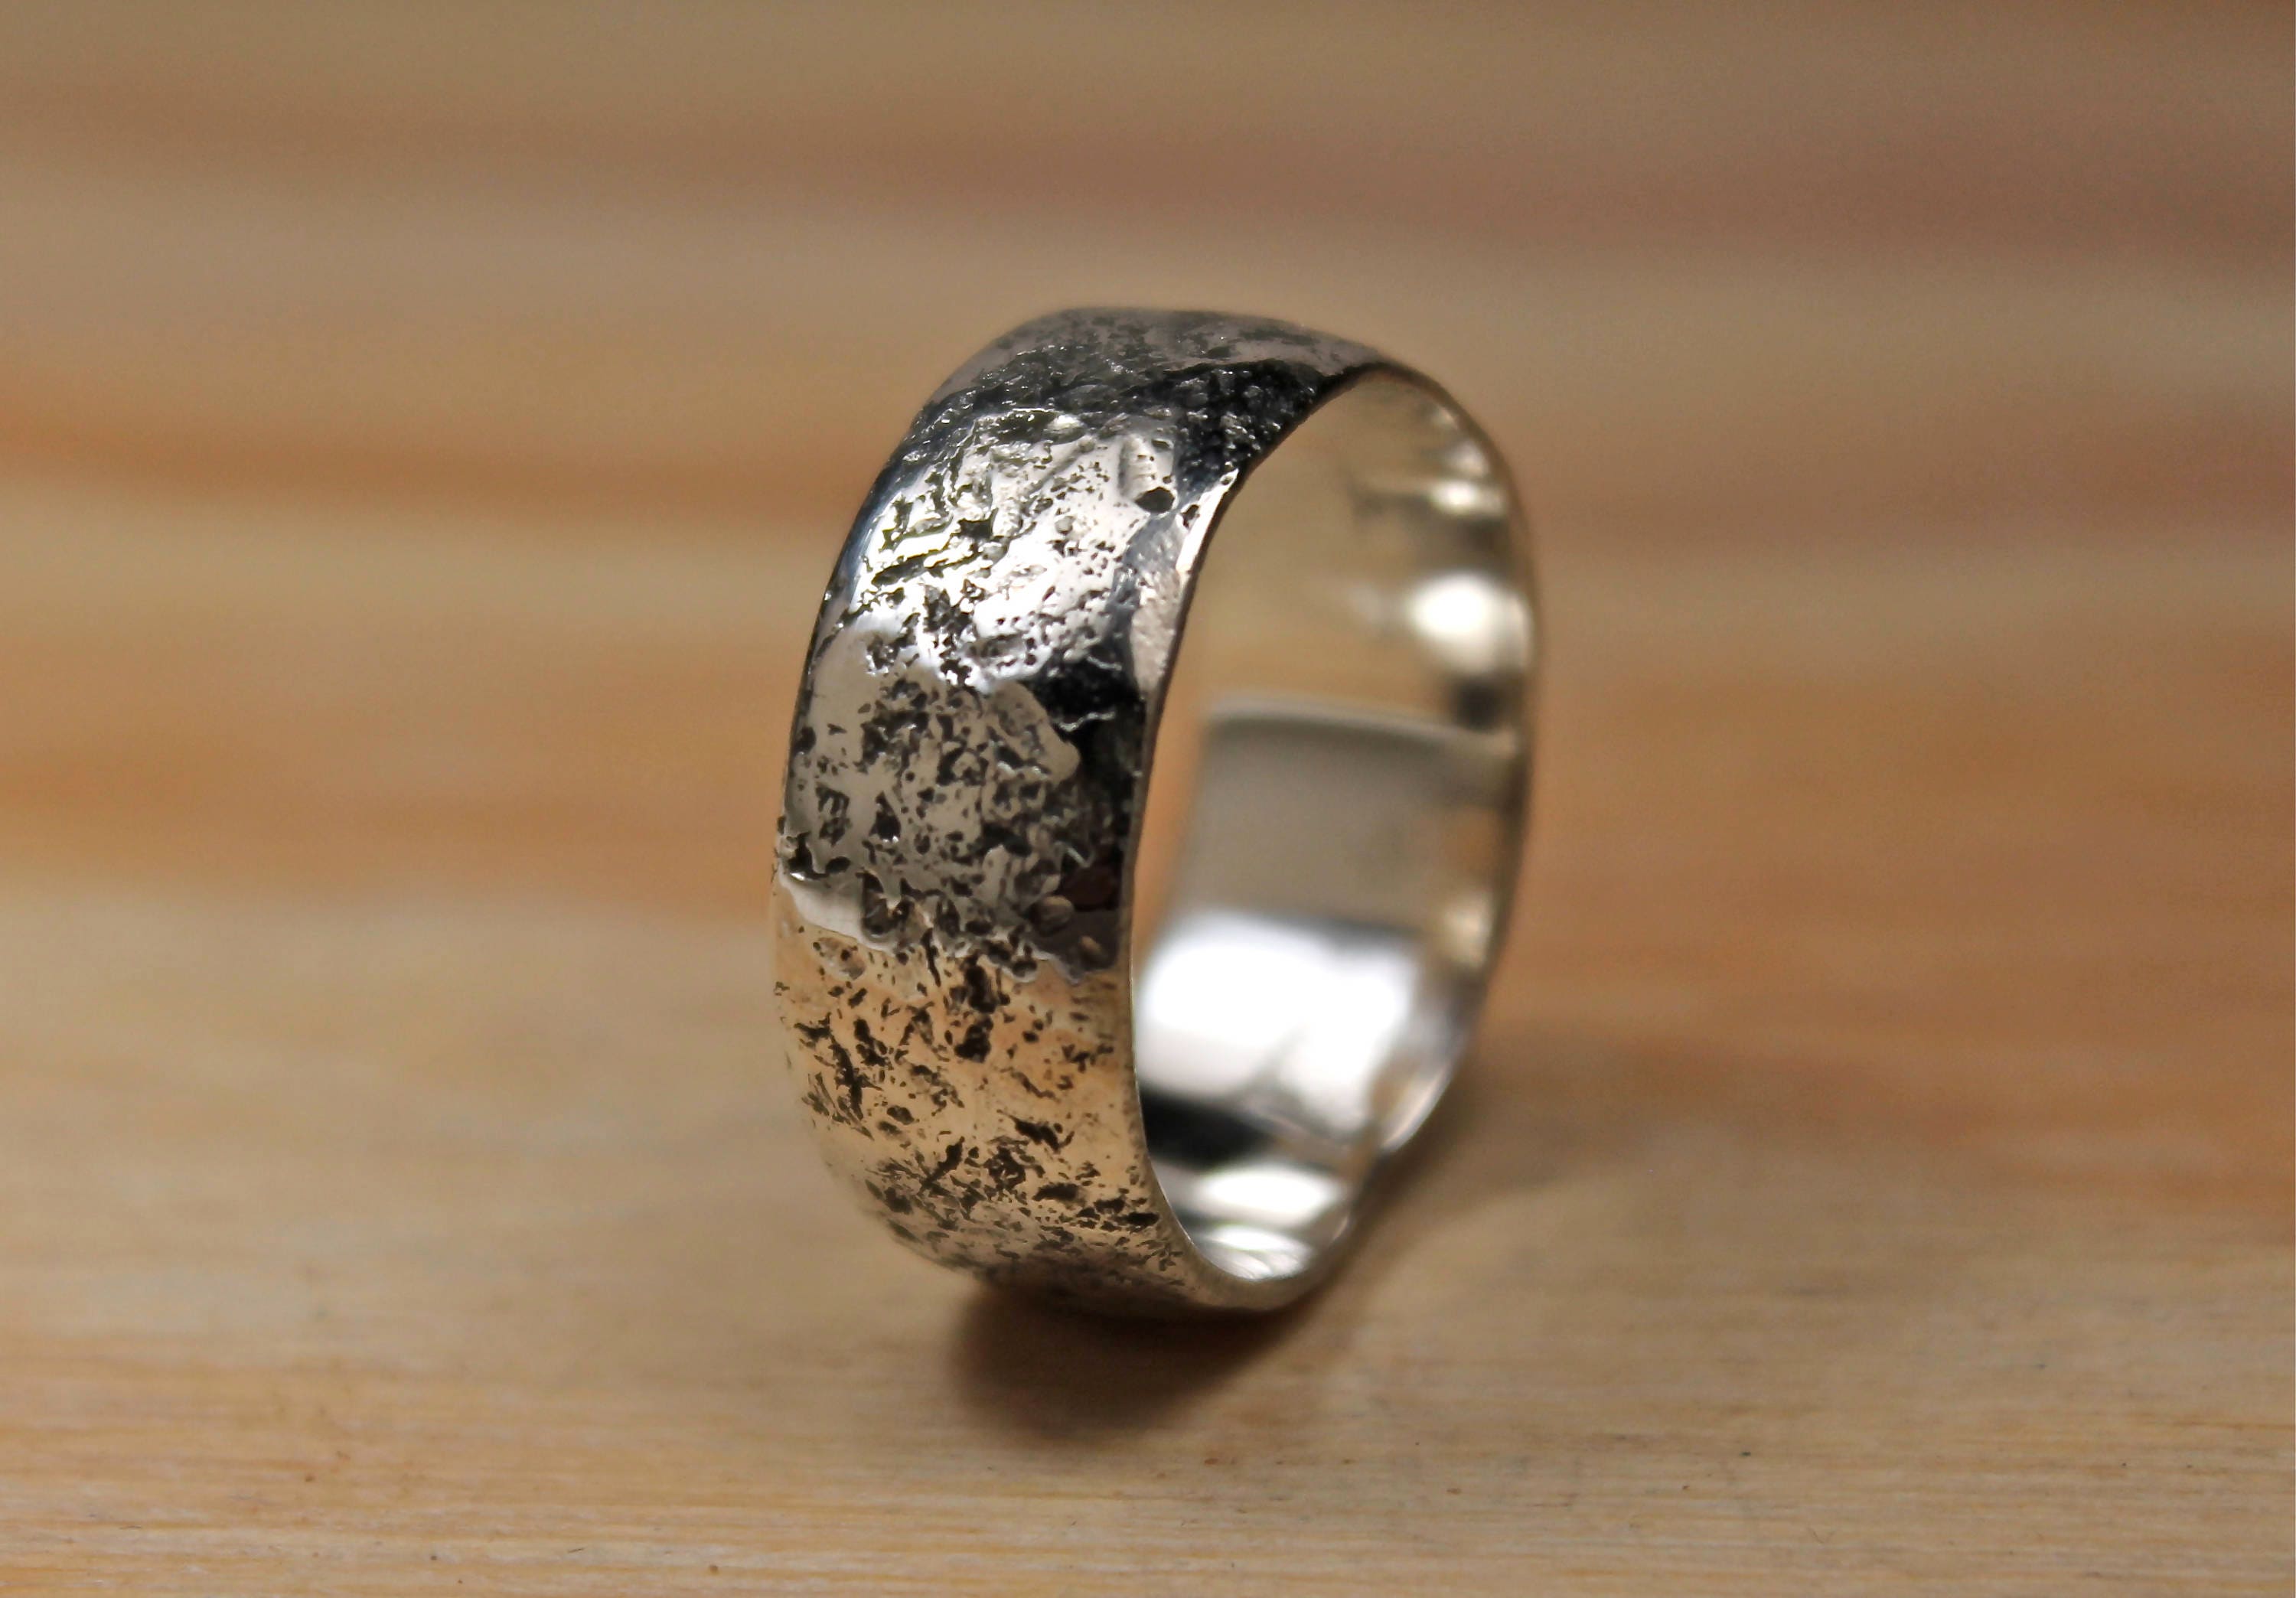 Chunky Silver Ring, Hand Hammered Band, 7mm Men’s Textured Forged Industrial Jewellery